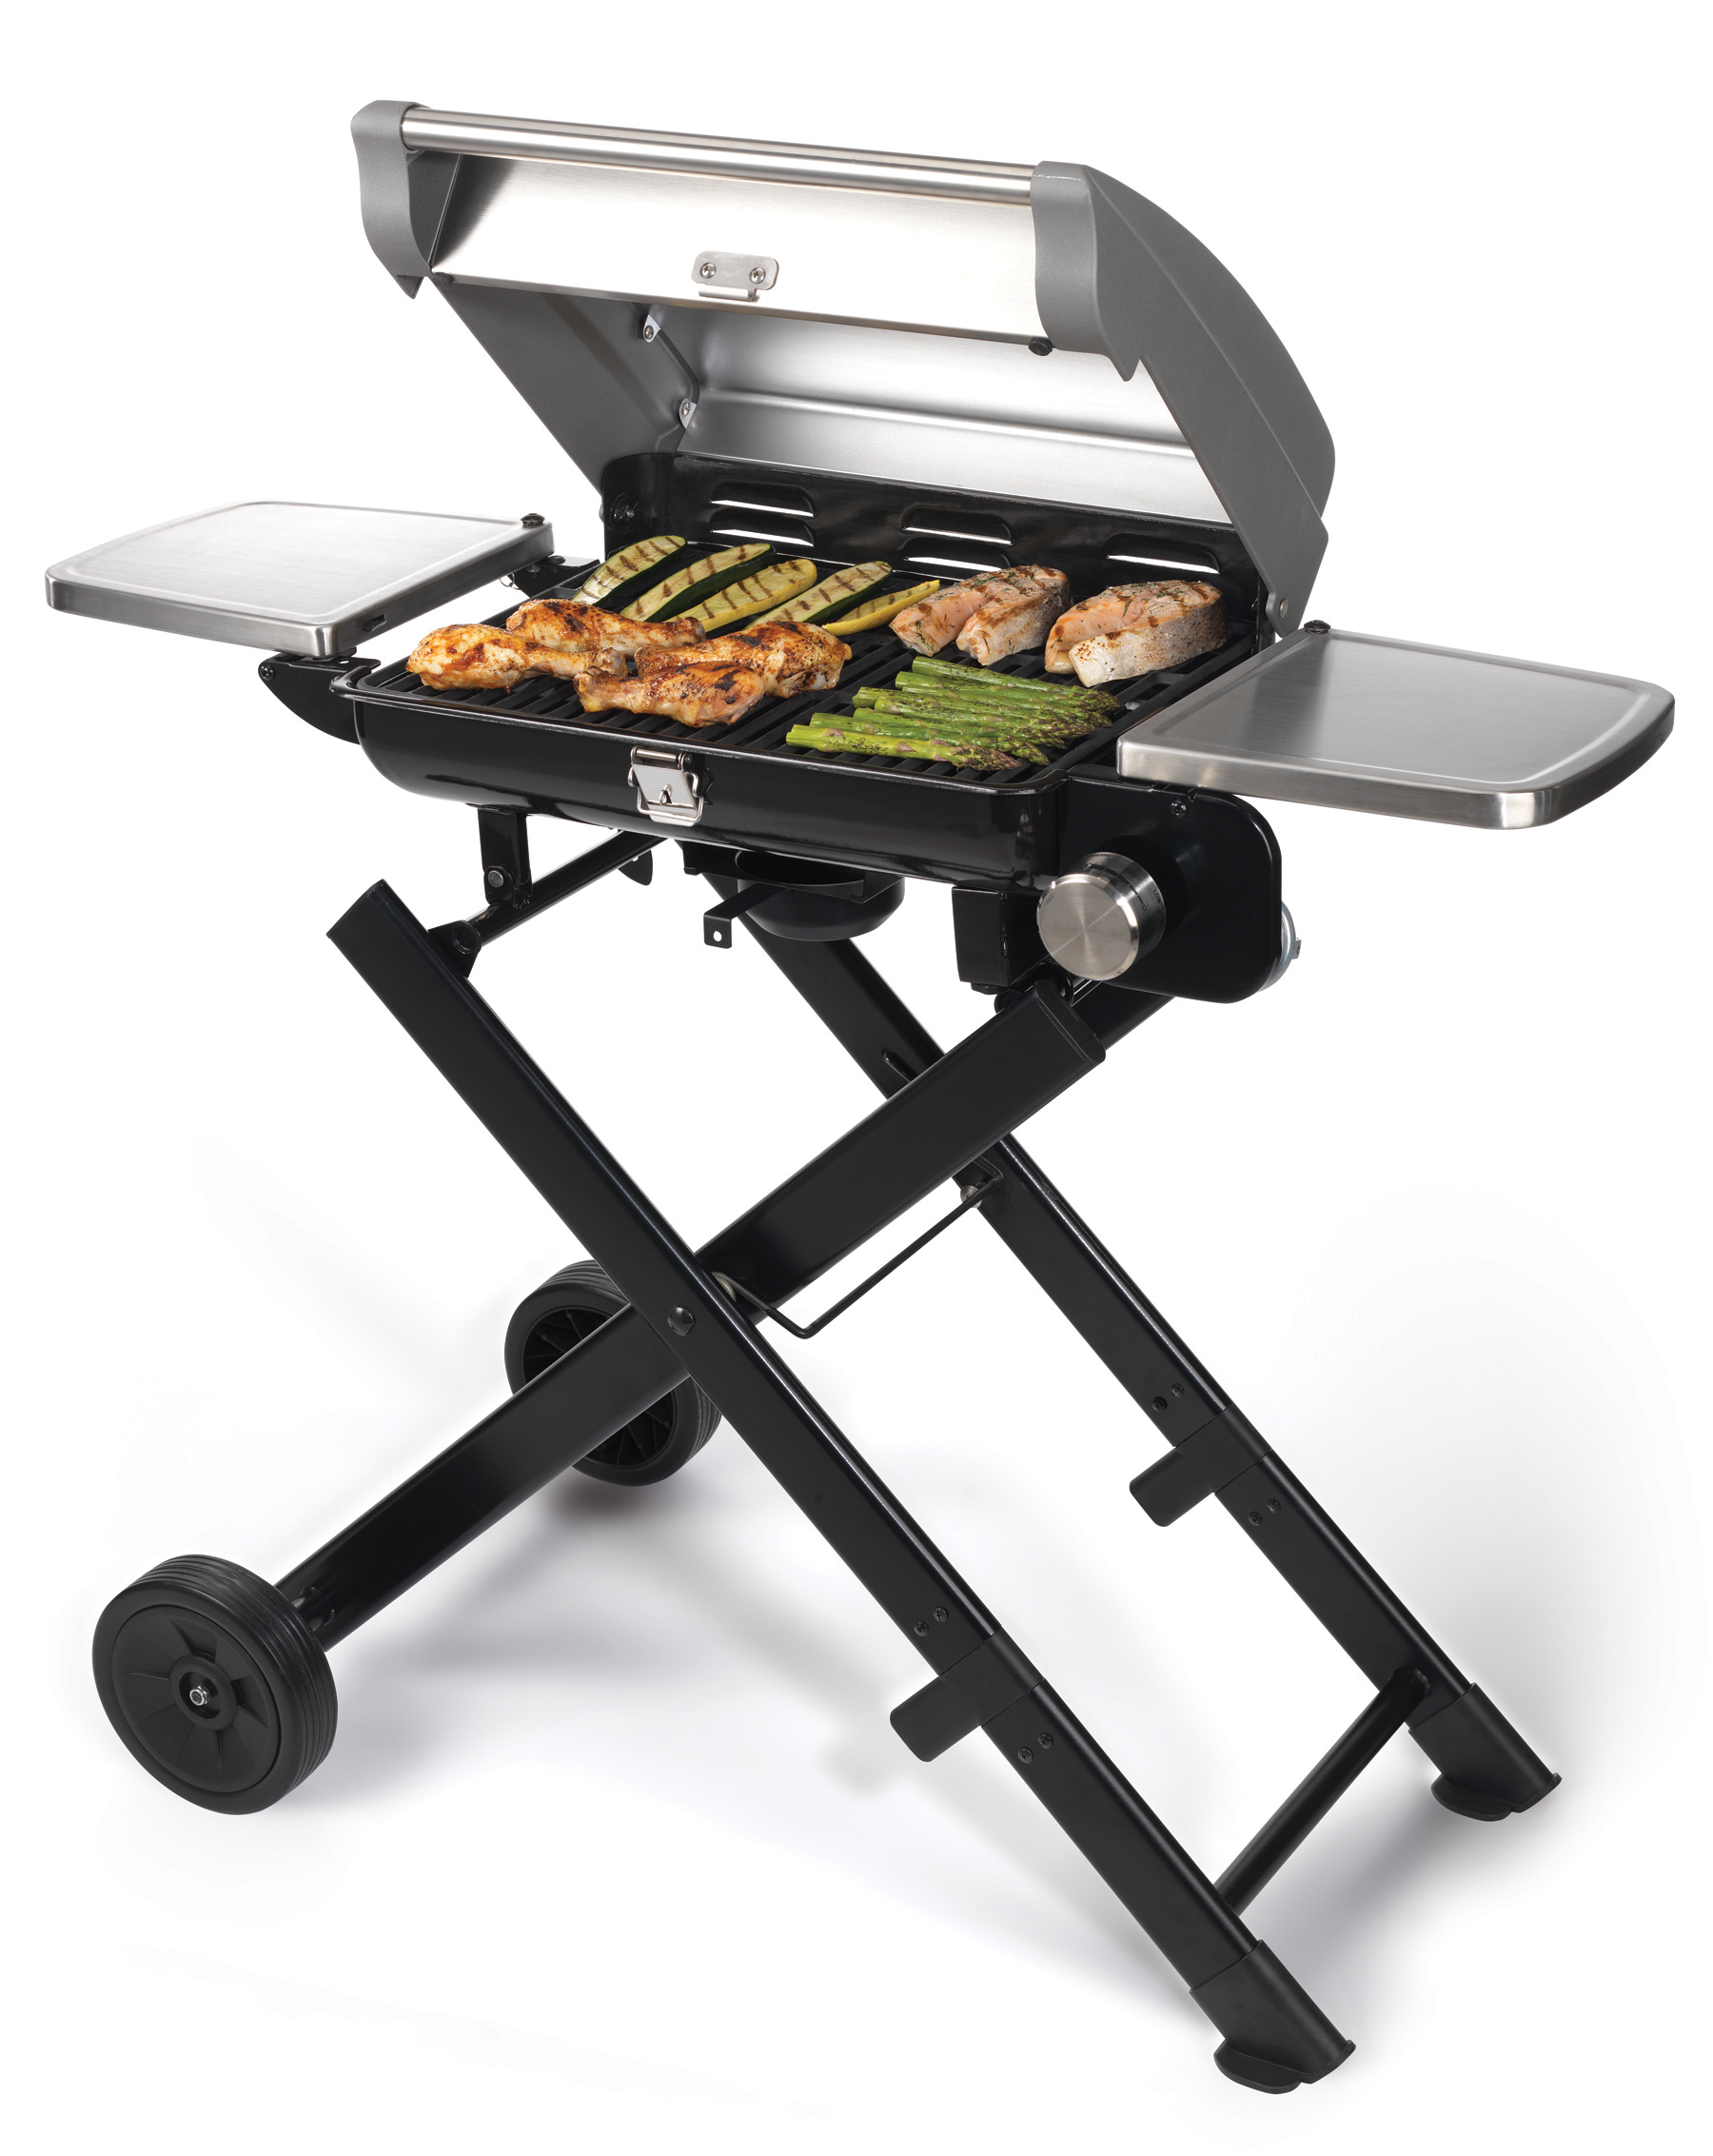 Cuisinart All Foods Roll-Away Portable Outdoor LP Gas Grill - image 4 of 4